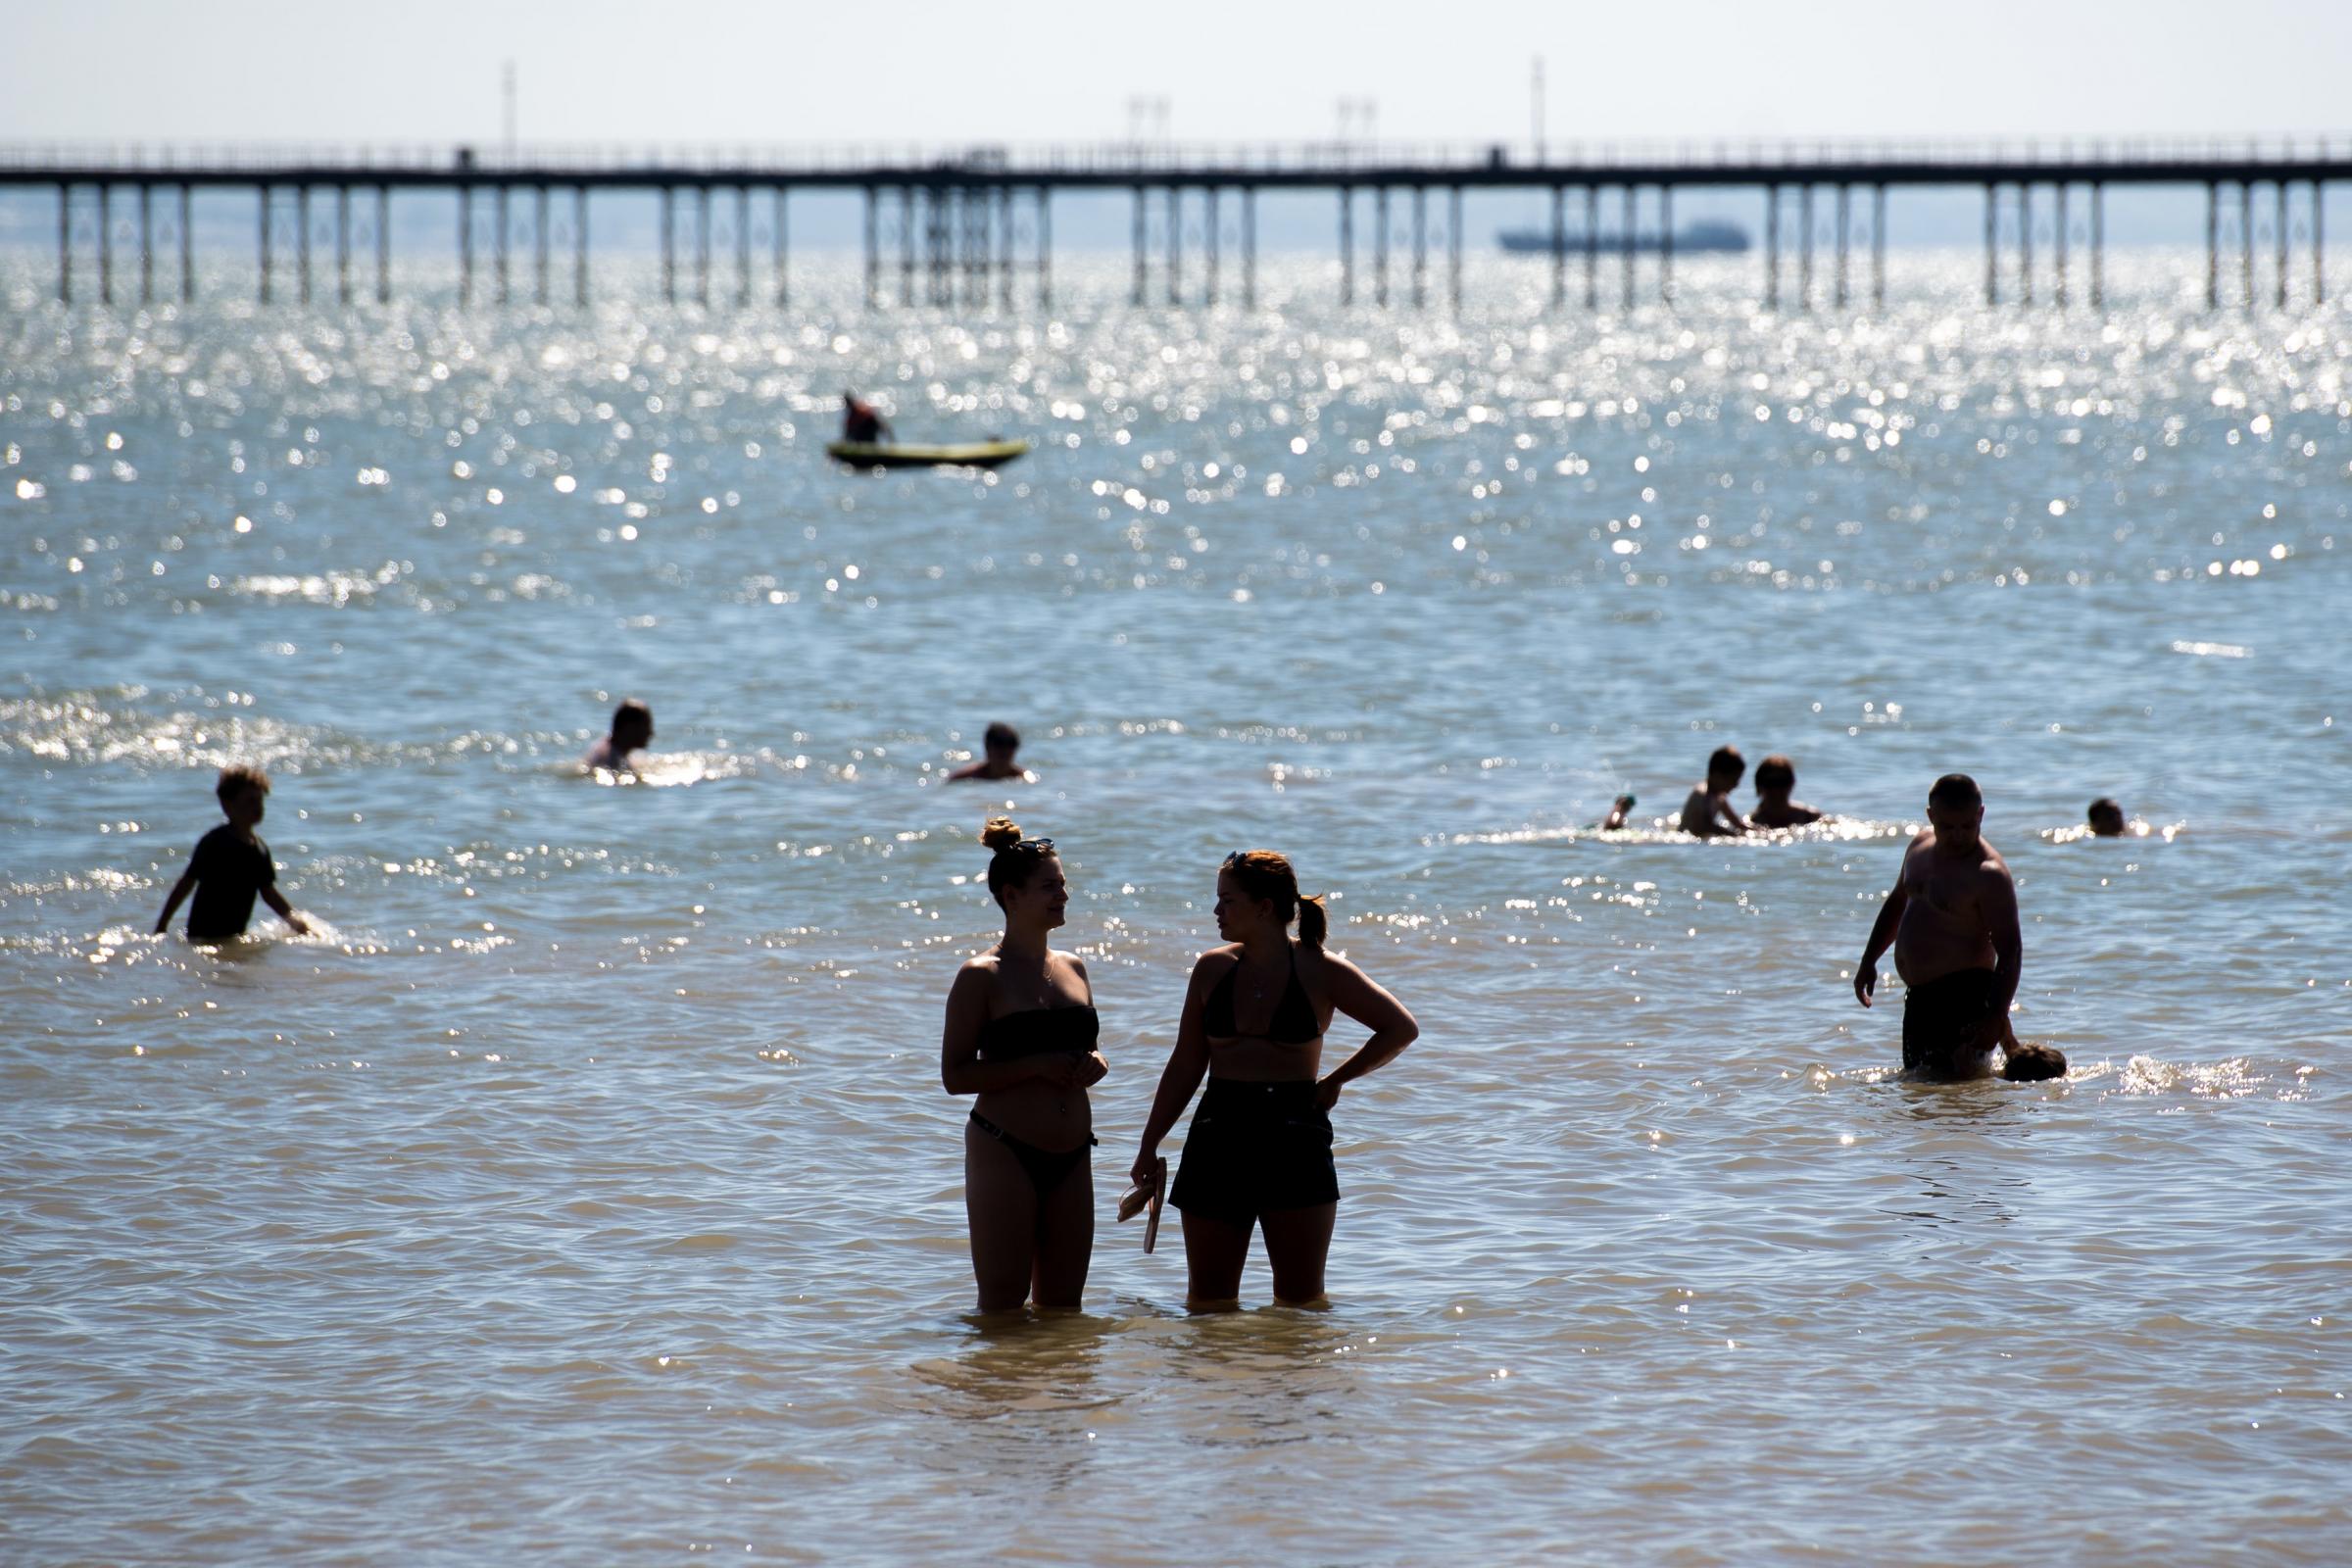 A survey of 2,000 adults on the 50 best UK beaches saw Southend finish in 36th place. Picture: PA